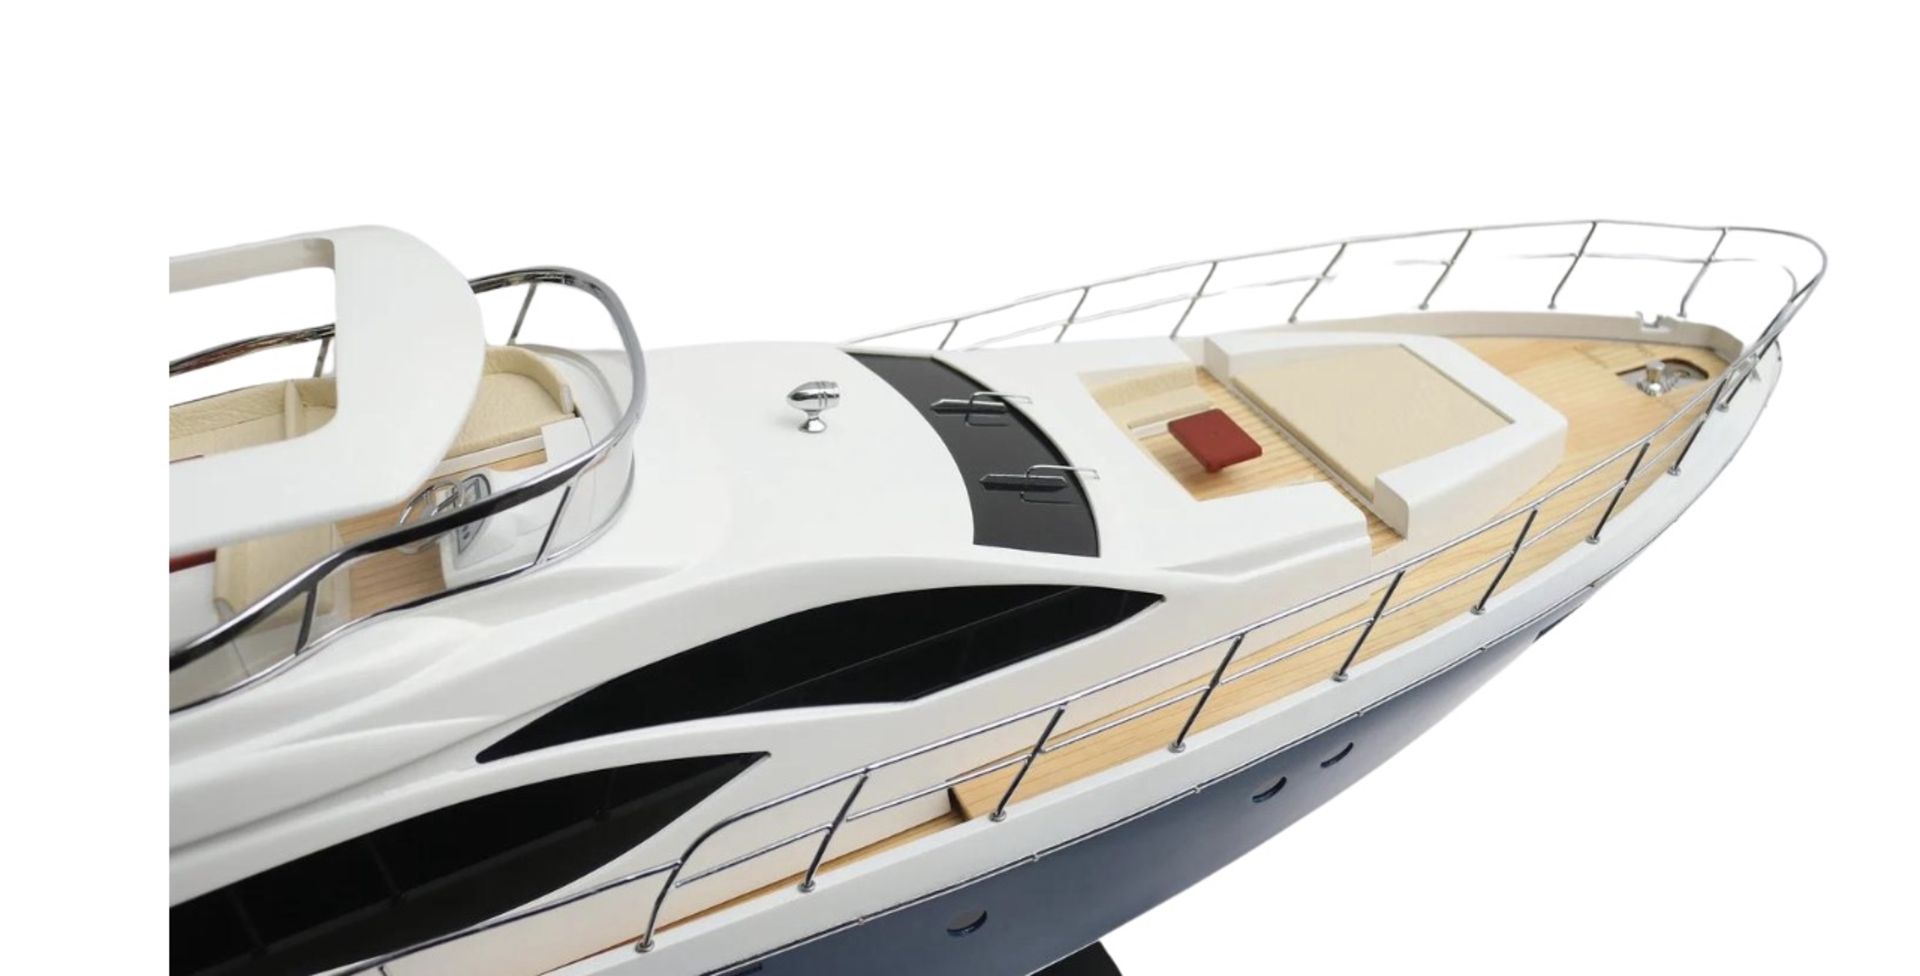 Azimut 82 Yacht Wooden Scale Desk Display Model - Image 6 of 10